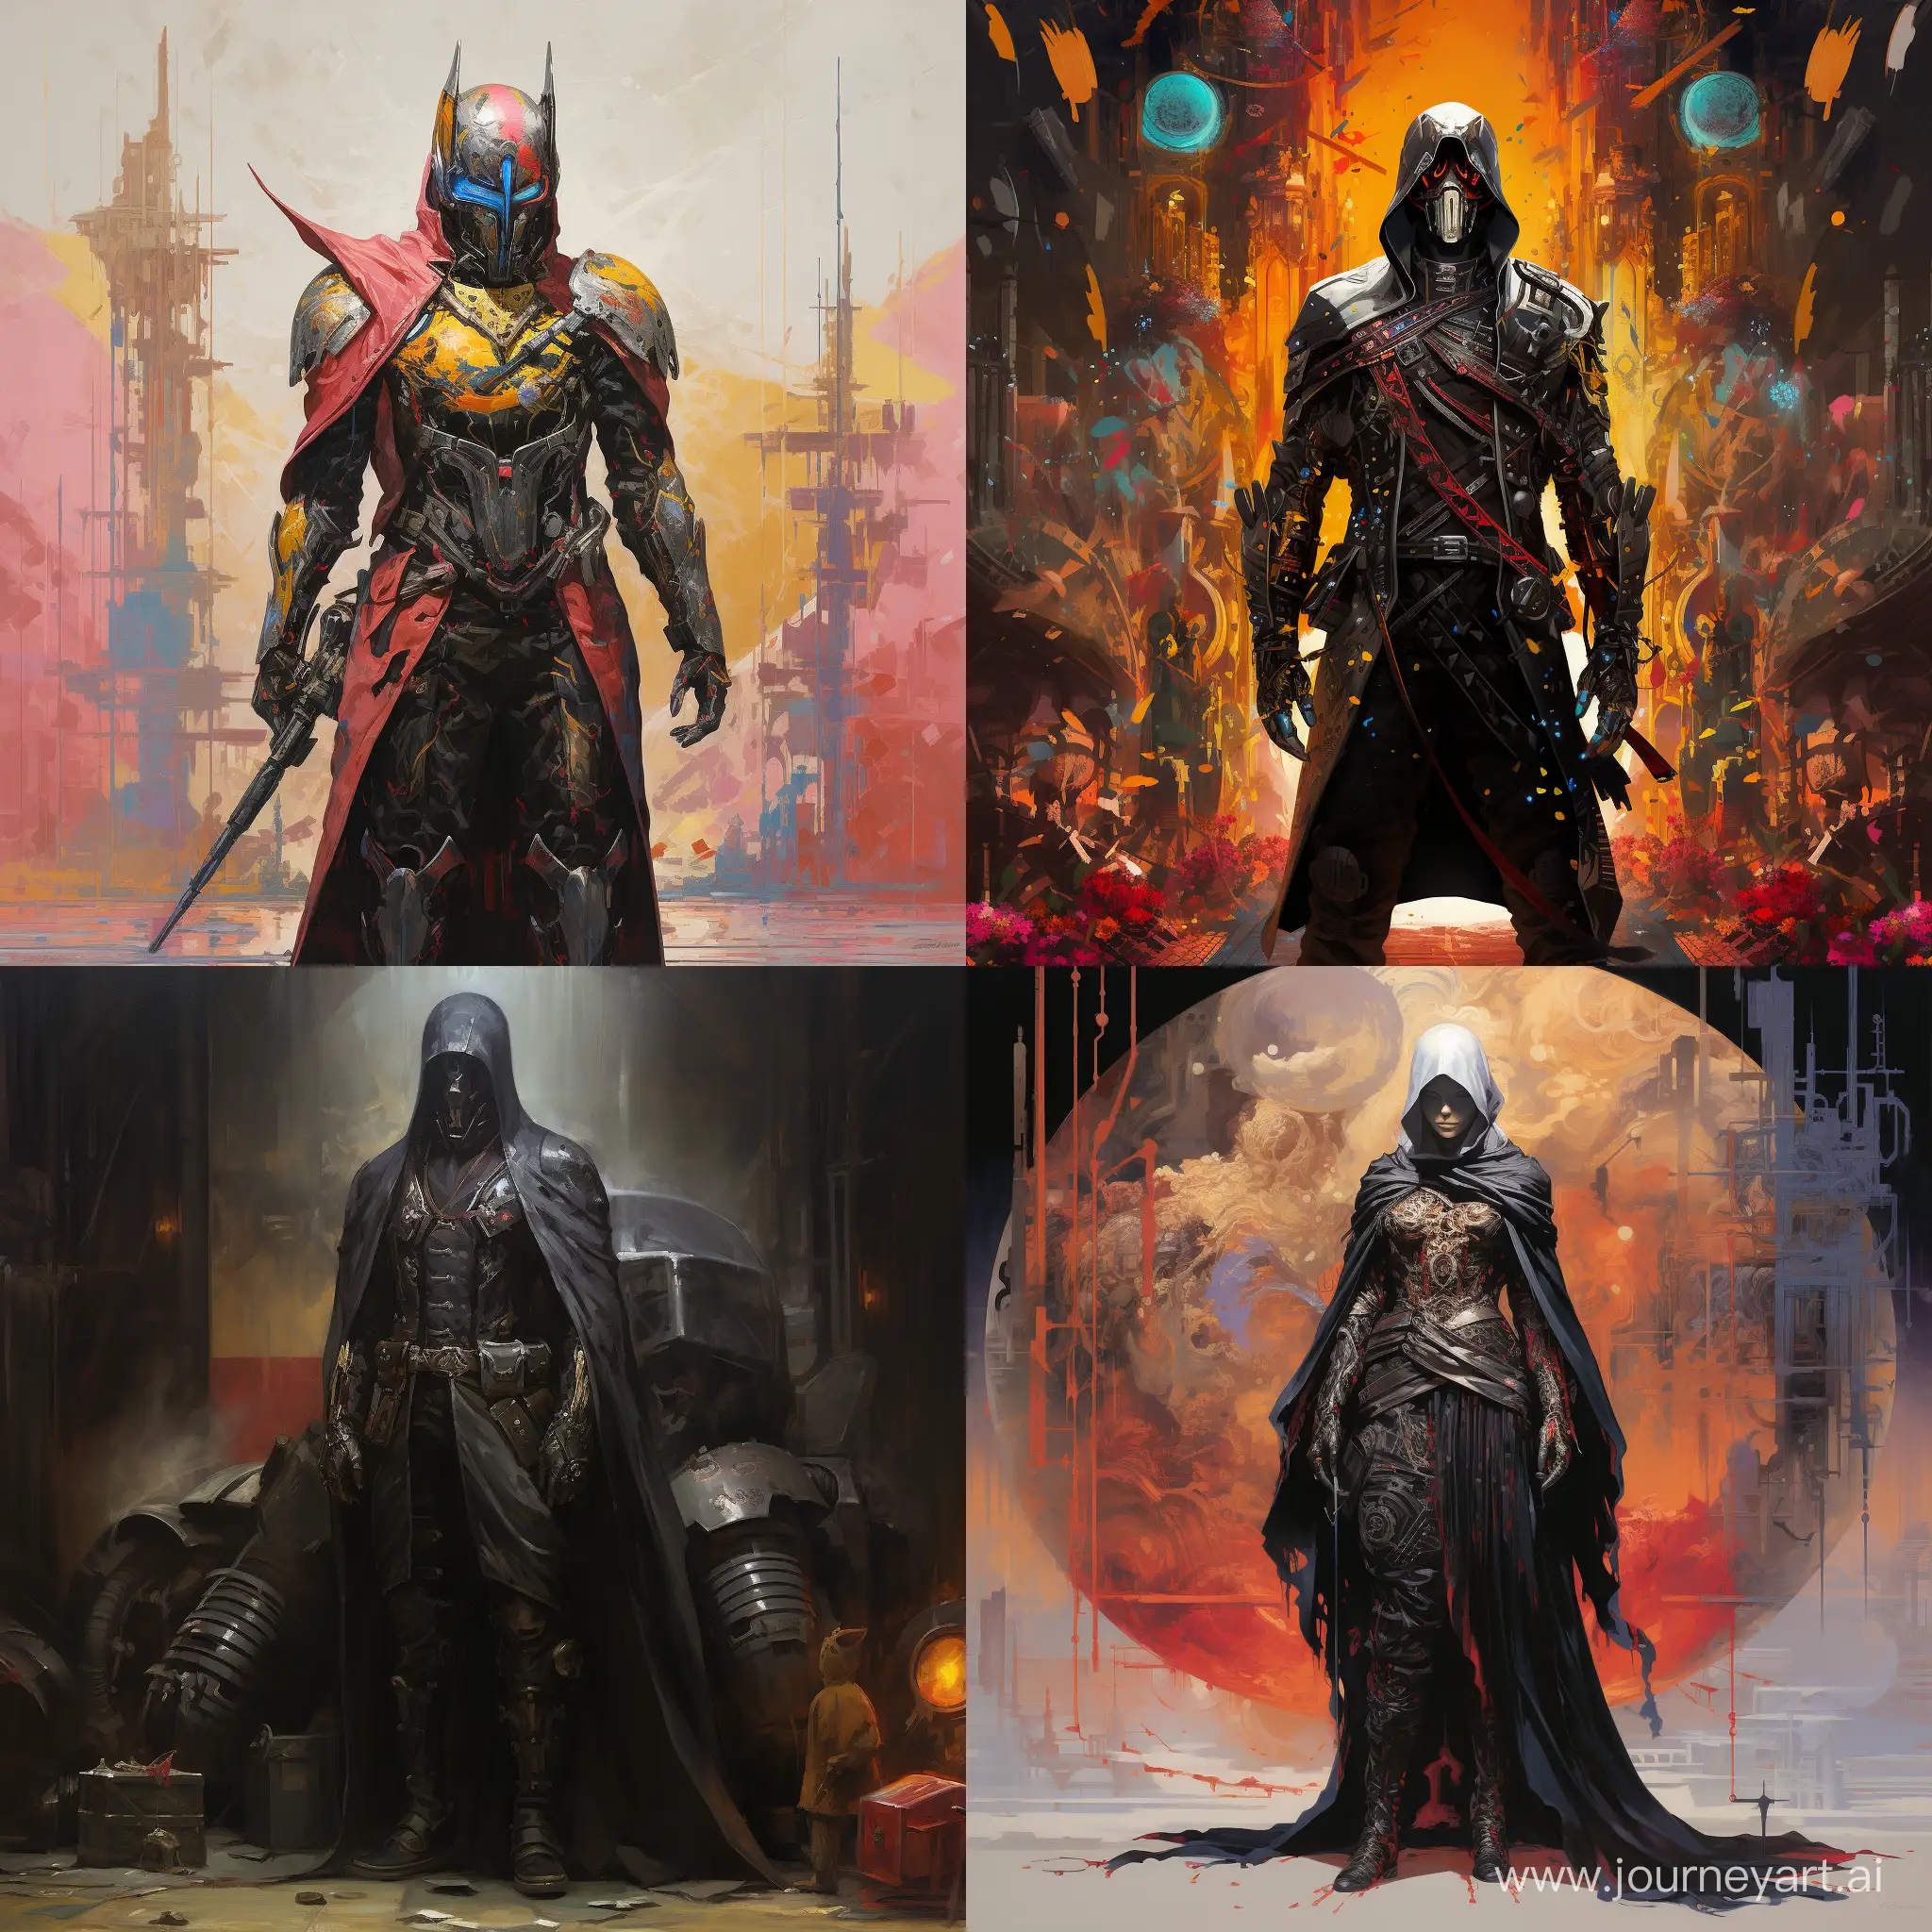 Full length portrait, ::1.1, a black knight racer in armor stands at full height, in cyberpunk style, an explosion of colors, abstraction